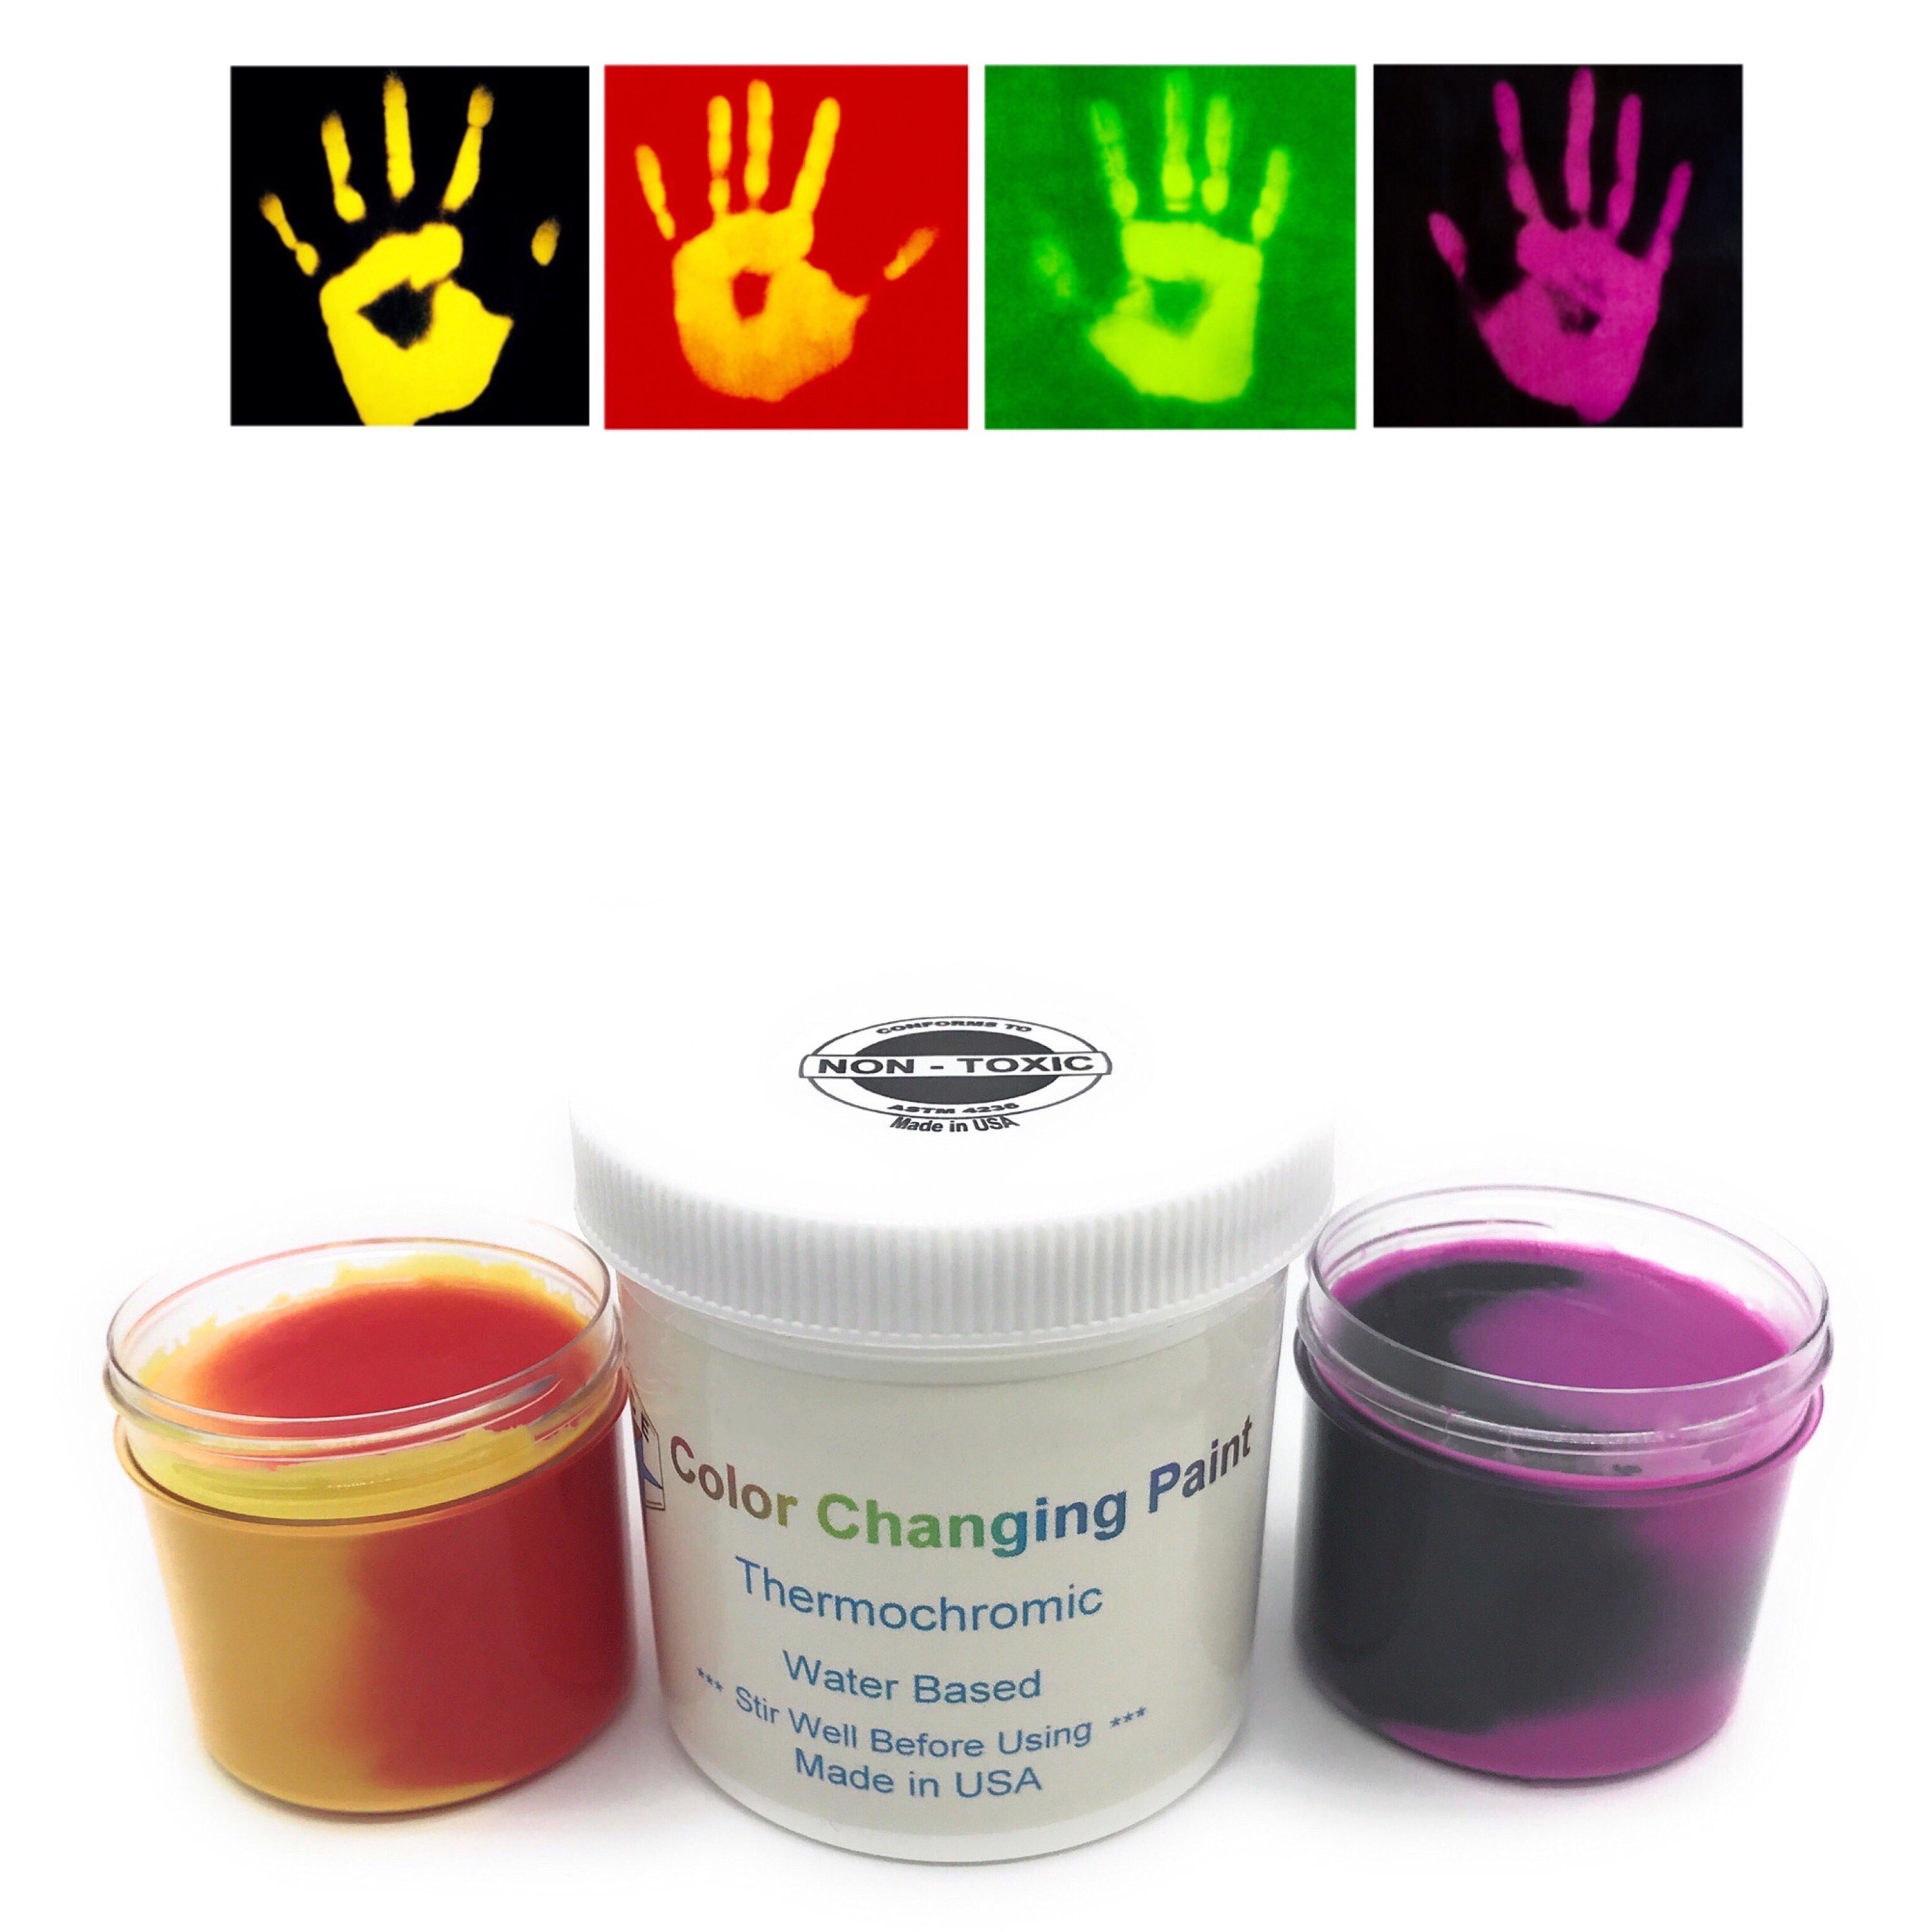 THERMOCHROMIC TEMPERATURE COLOUR CHANGING PIGMENT POWDER - BLACK TO RED